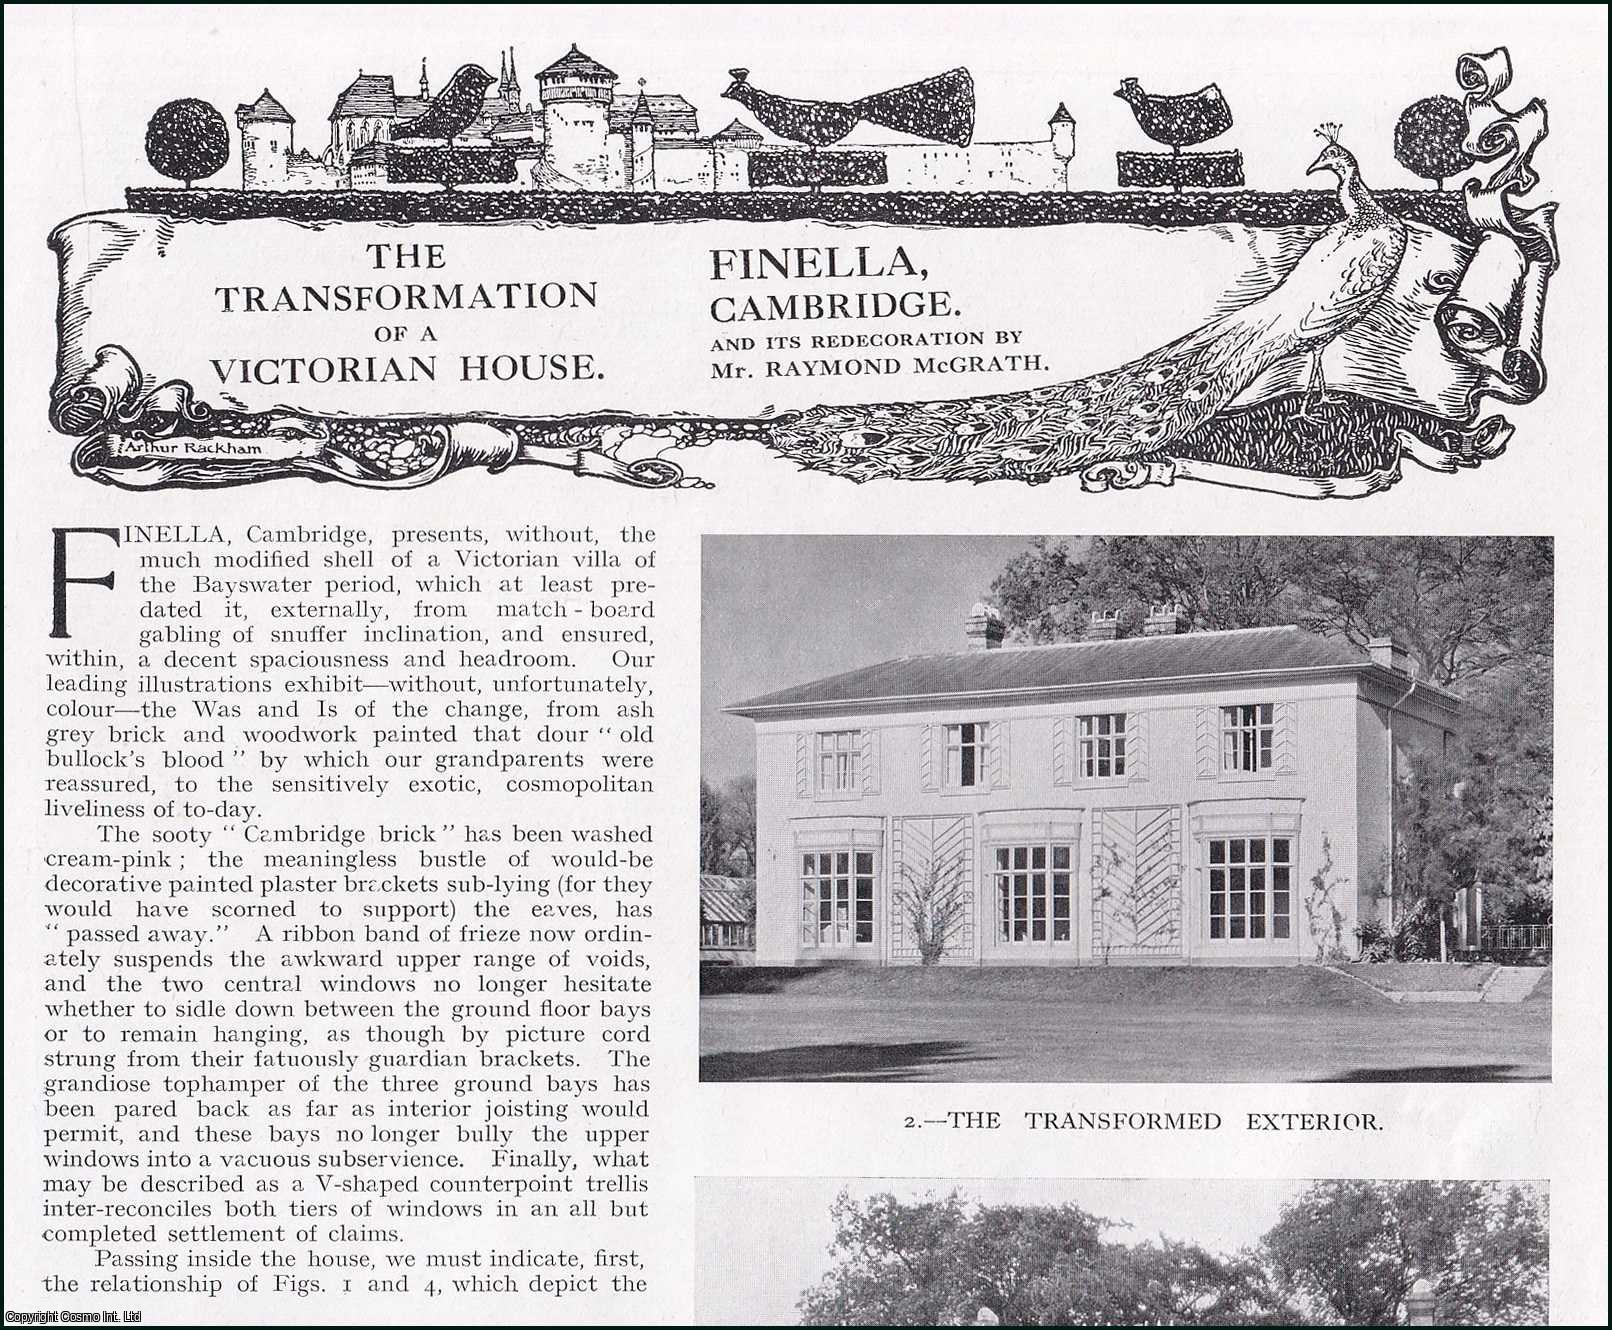 Raymond McGrath - The Transformation of a Victorian House: Finella, Cambridge and its Redecoration. Several pictures and accompanying text, removed from an original issue of Country Life Magazine, 1930.